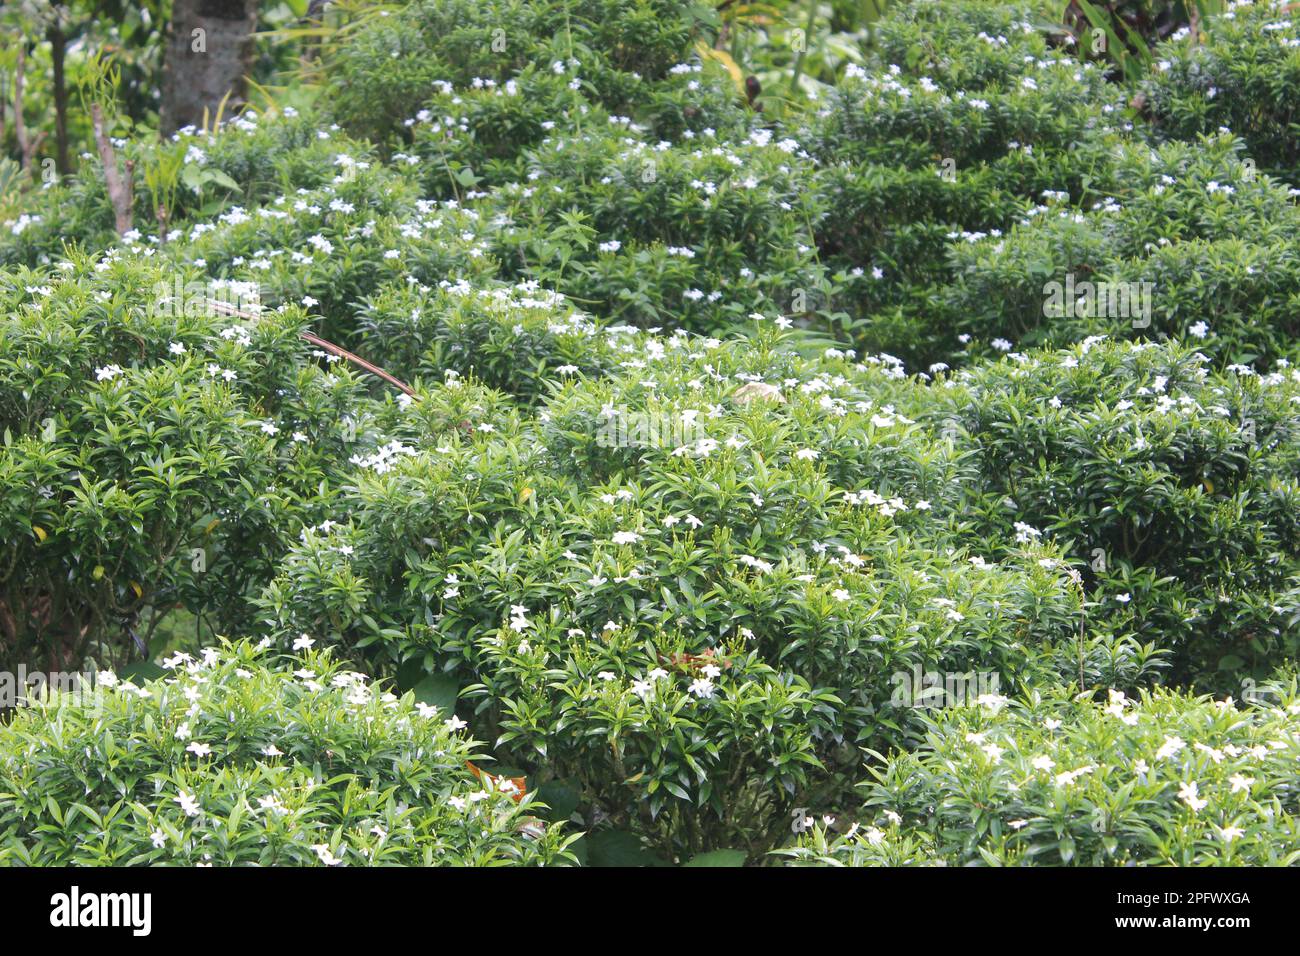 beautiful Taiwan beauty flower (Cuphea hyssopifolia) with green leaves Stock Photo